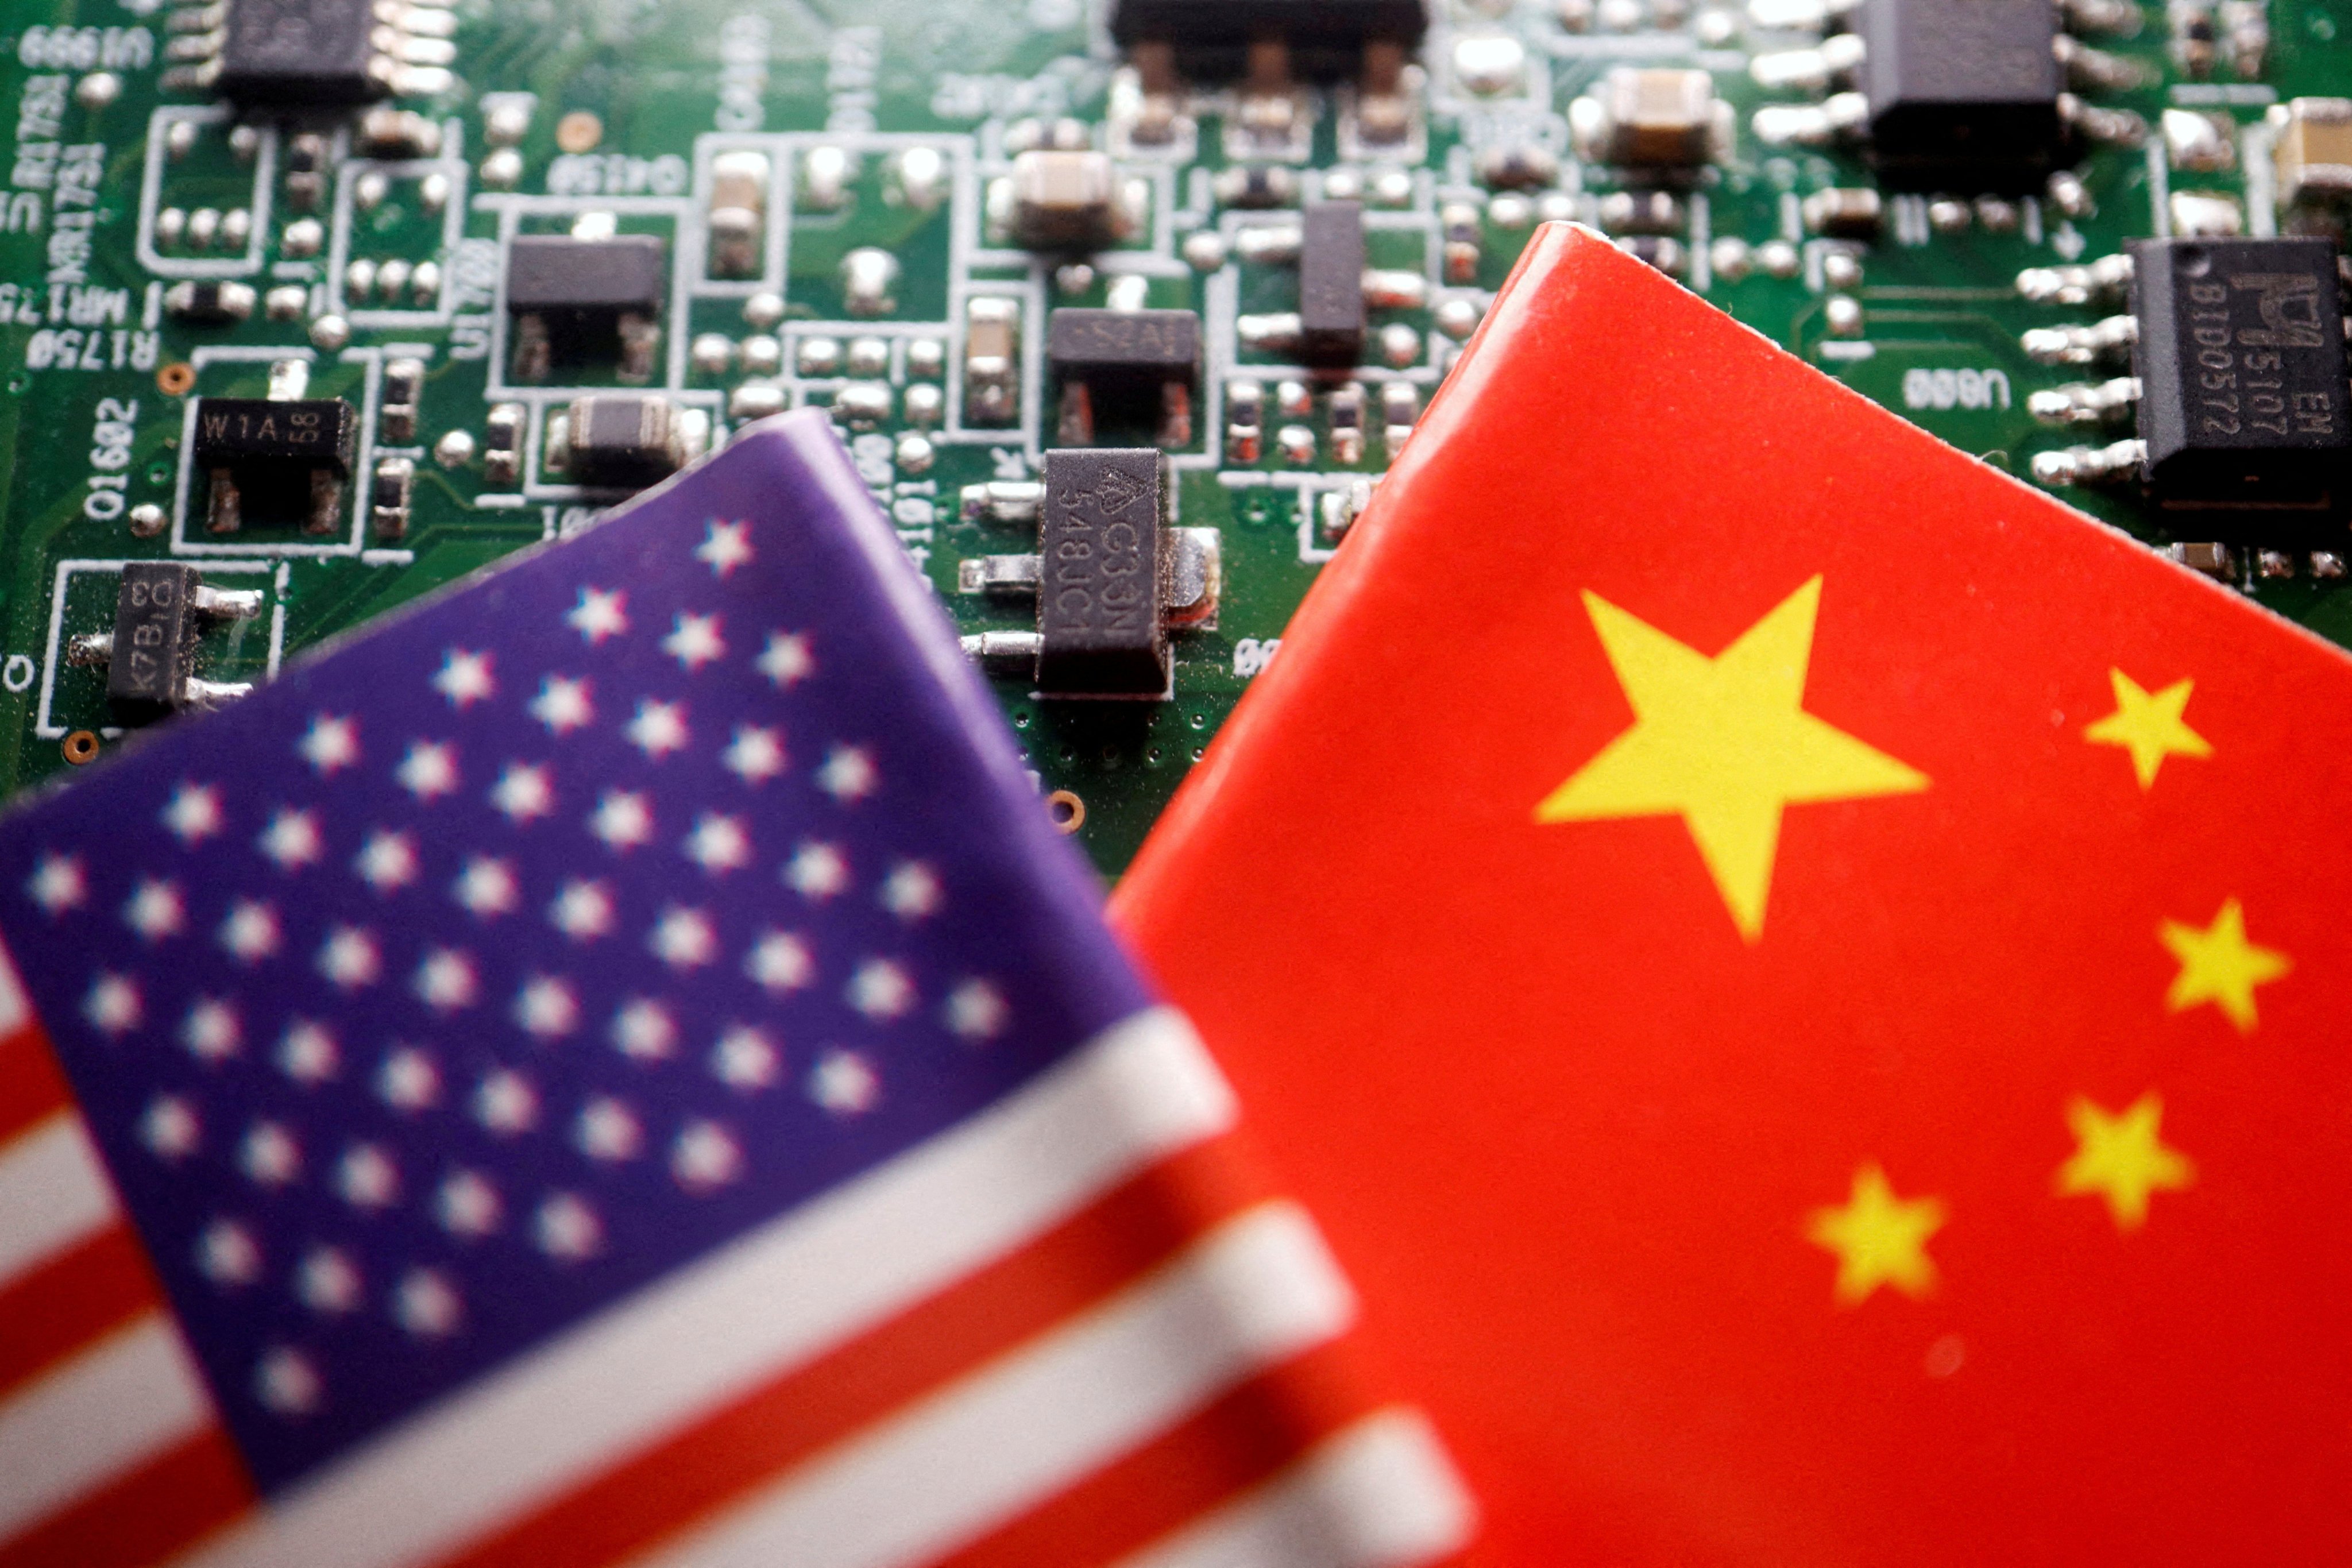 Flags of China and the US are displayed on a printed circuit board with semiconductor chips. Photo: Reuters